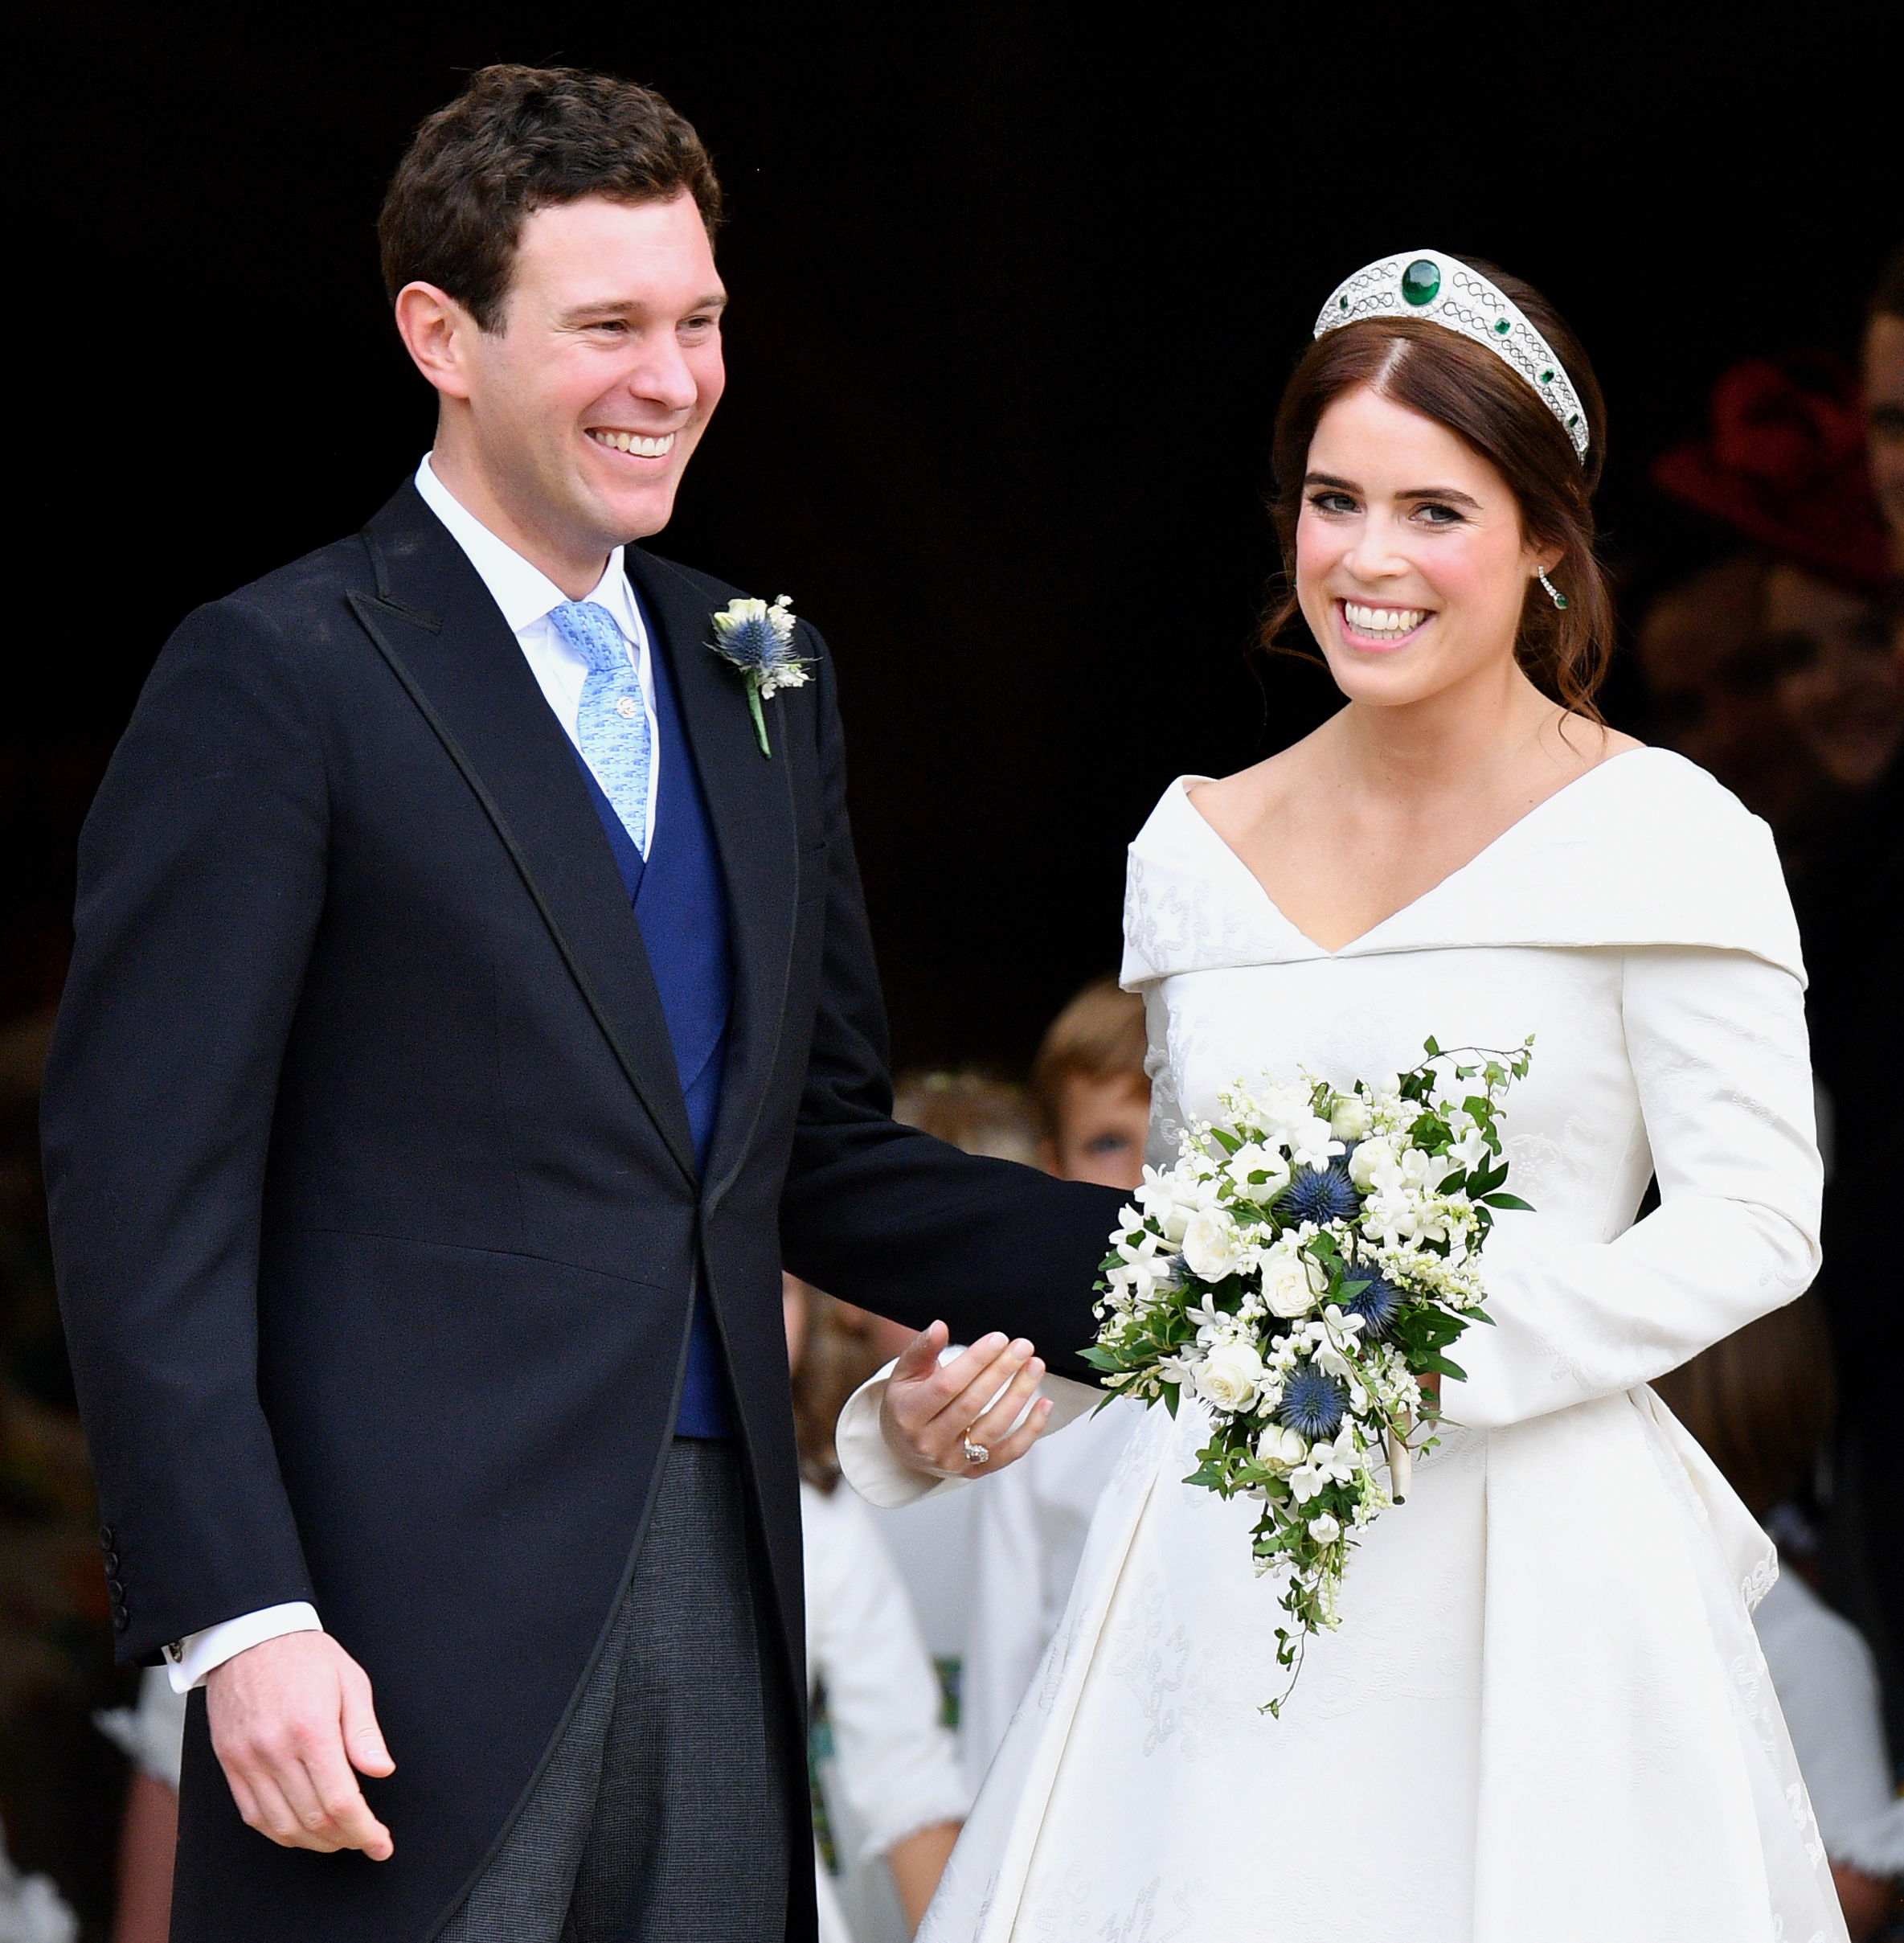 Jack Brooksbank and Princess Eugenie leaving St George's Chapel after their wedding ceremony on October 12, 2018 in Windsor, England. | Source: Getty Images